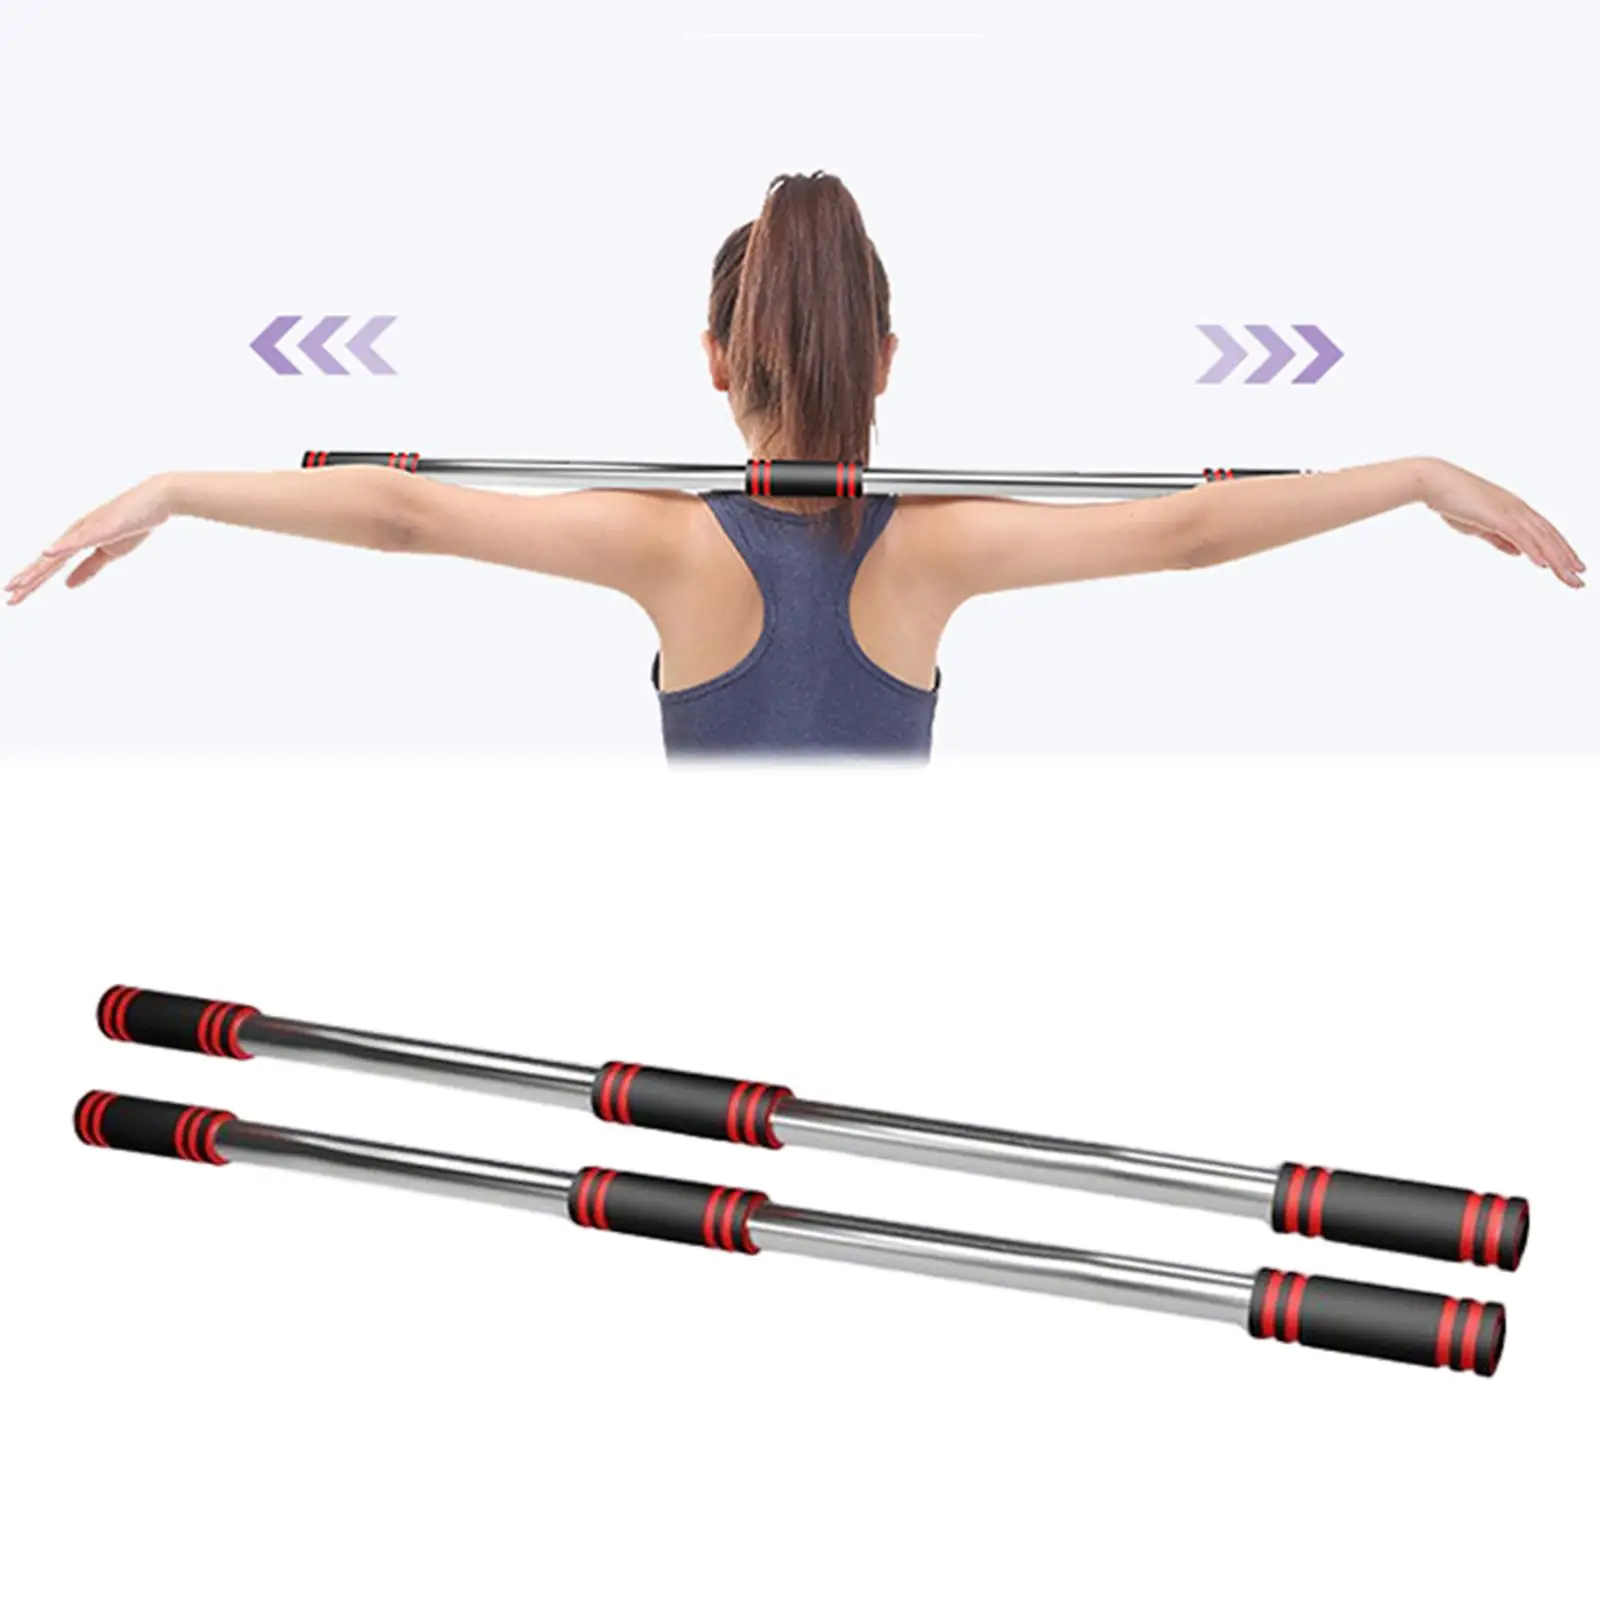 1 Pair of Yoga Pole Straightener Stretching Stick Detachable Multipurpose Mobility Training Steel Balance for Home Fitness Girls